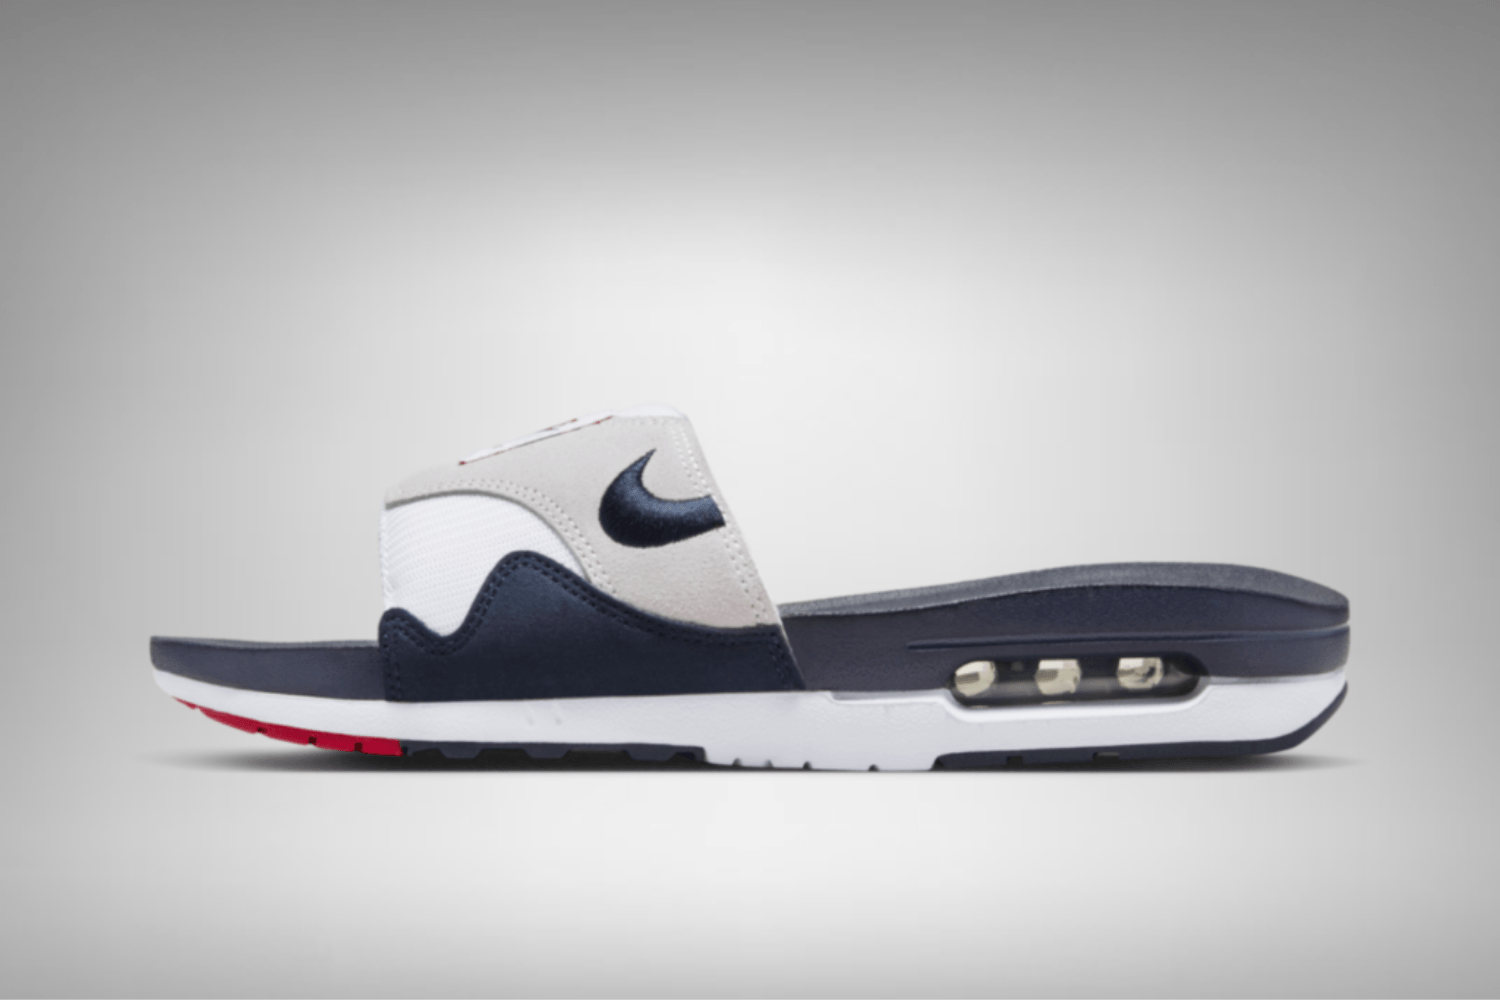 The Nike Air Max 1 Slide appears in an 'Obsidian' colorway